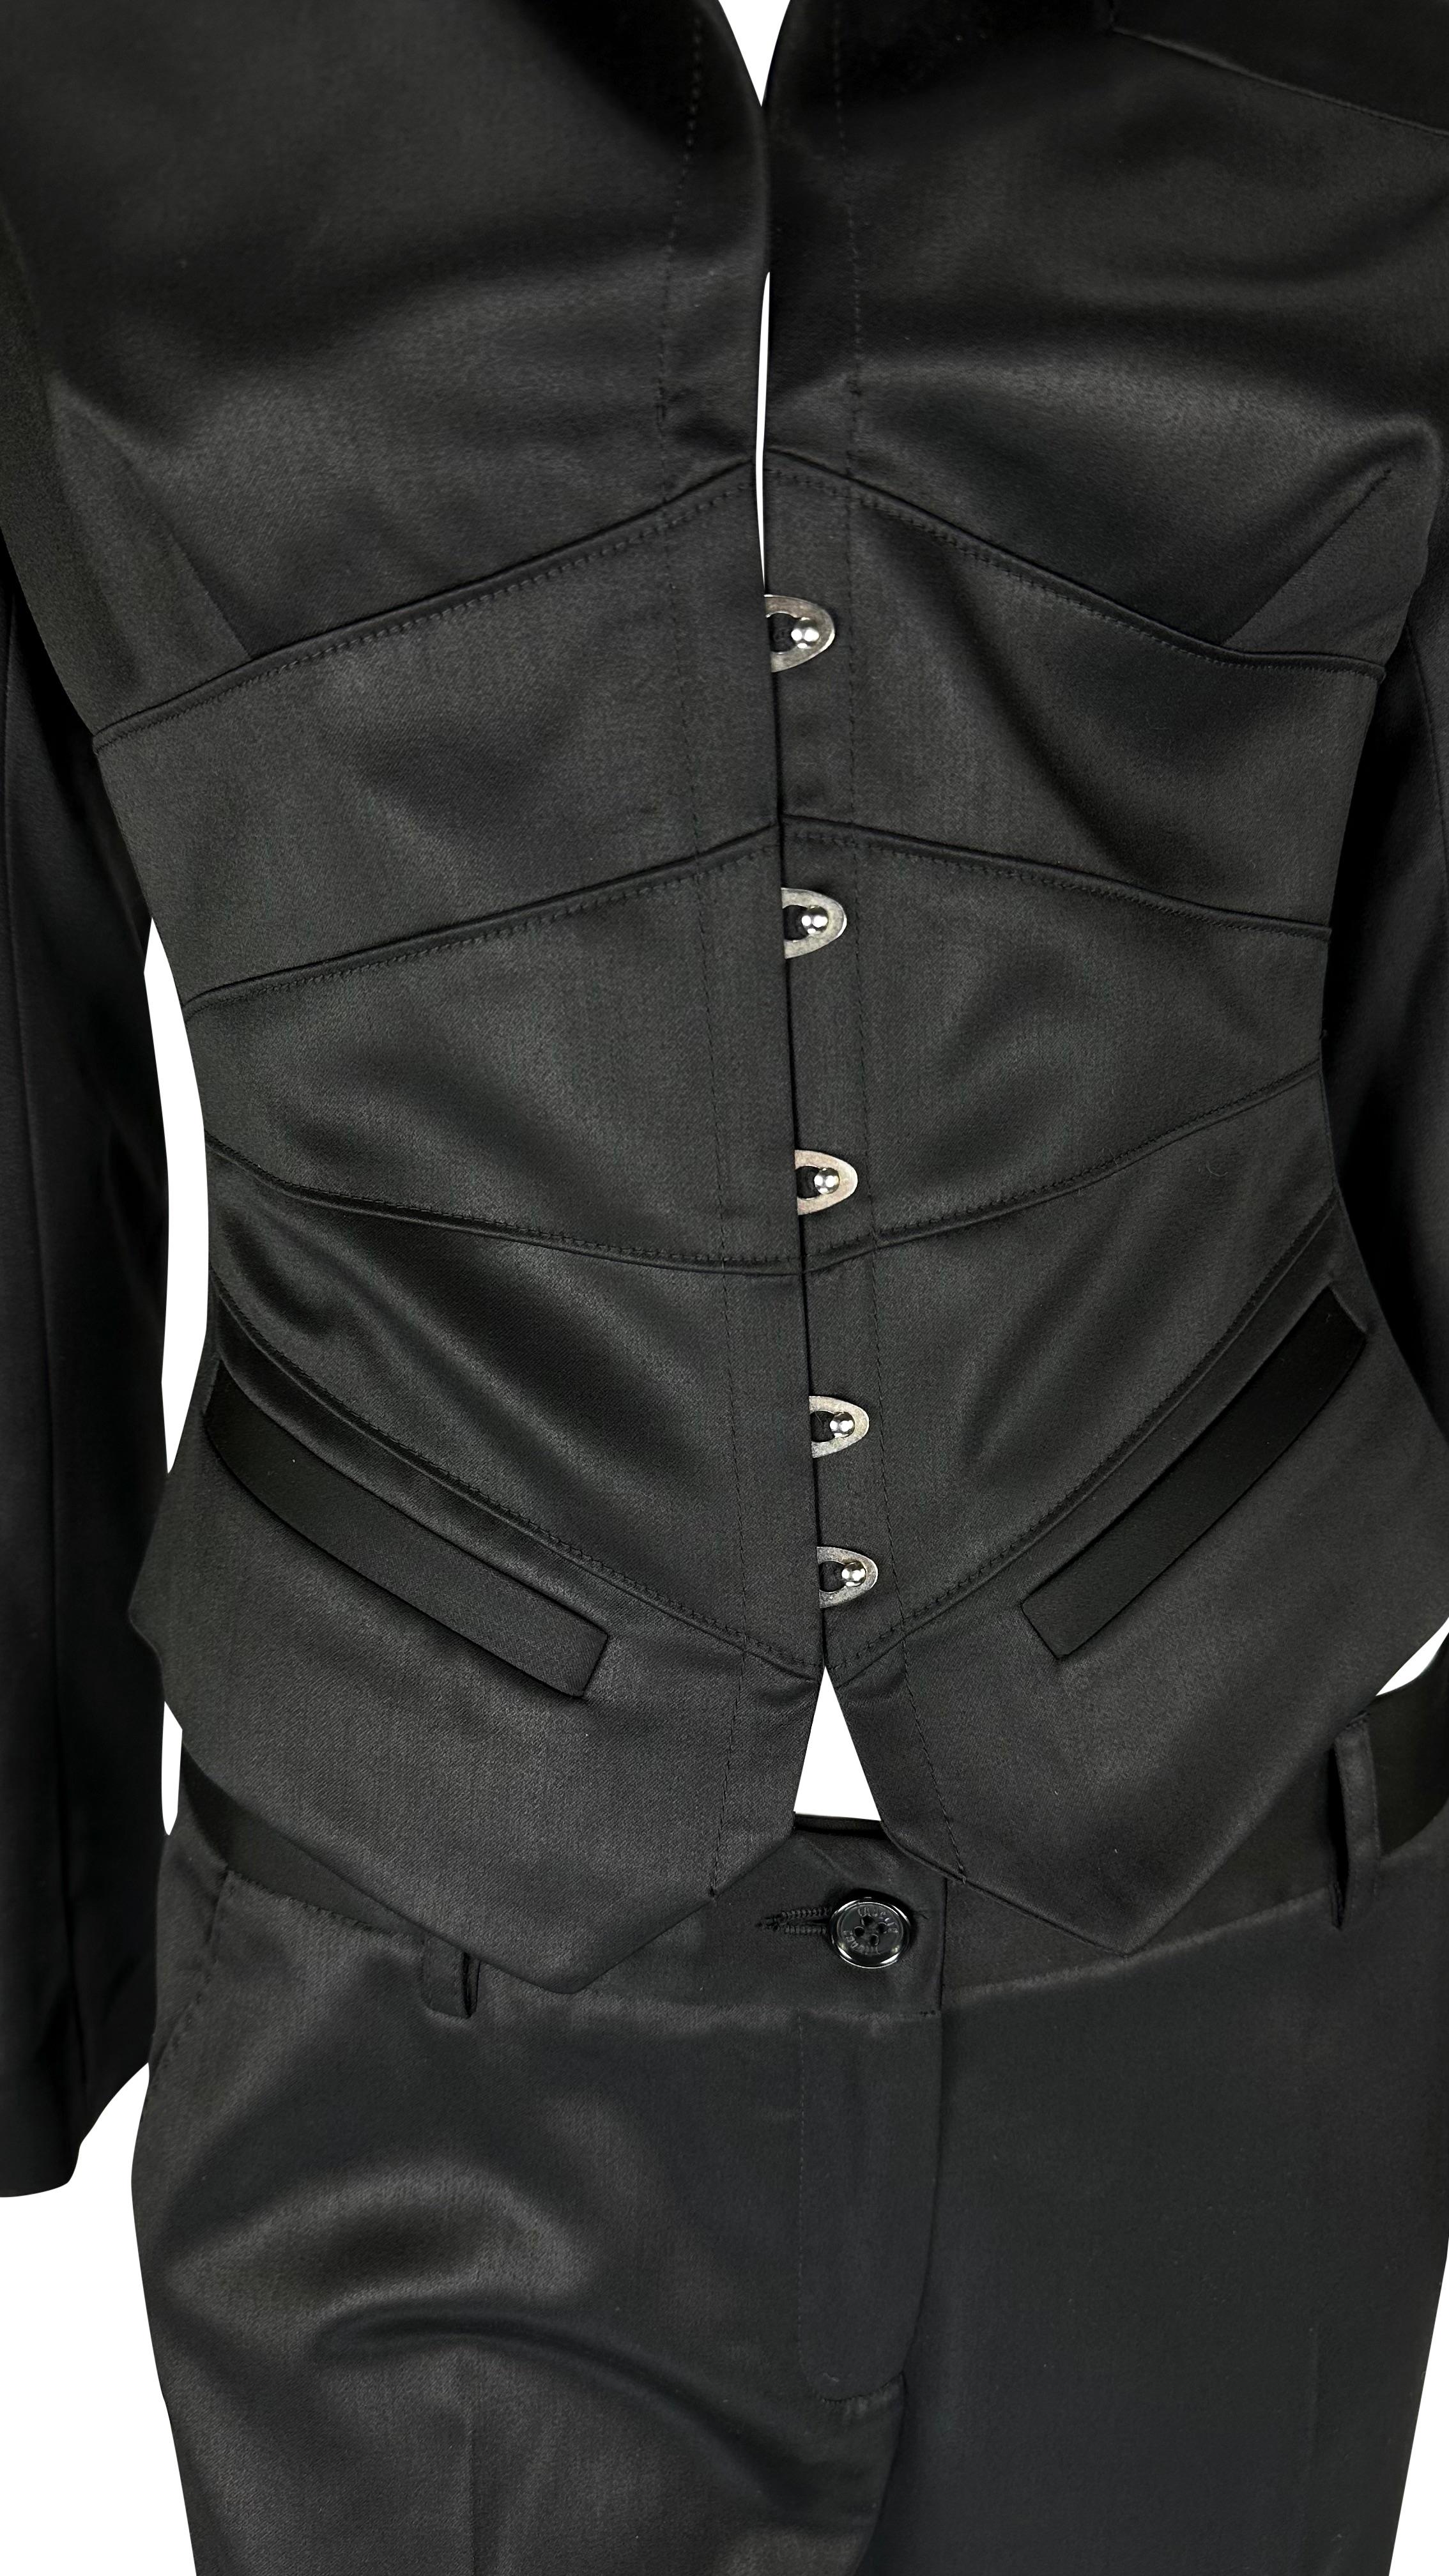 Presenting an incredible black corset Roberto Cavalli pantsuit. From the Fall/Winter 2004 collection, this suit is comprised of a black satiny corsetted blazer and matching wide-leg pants. The jacket in this set features metal boning used as a